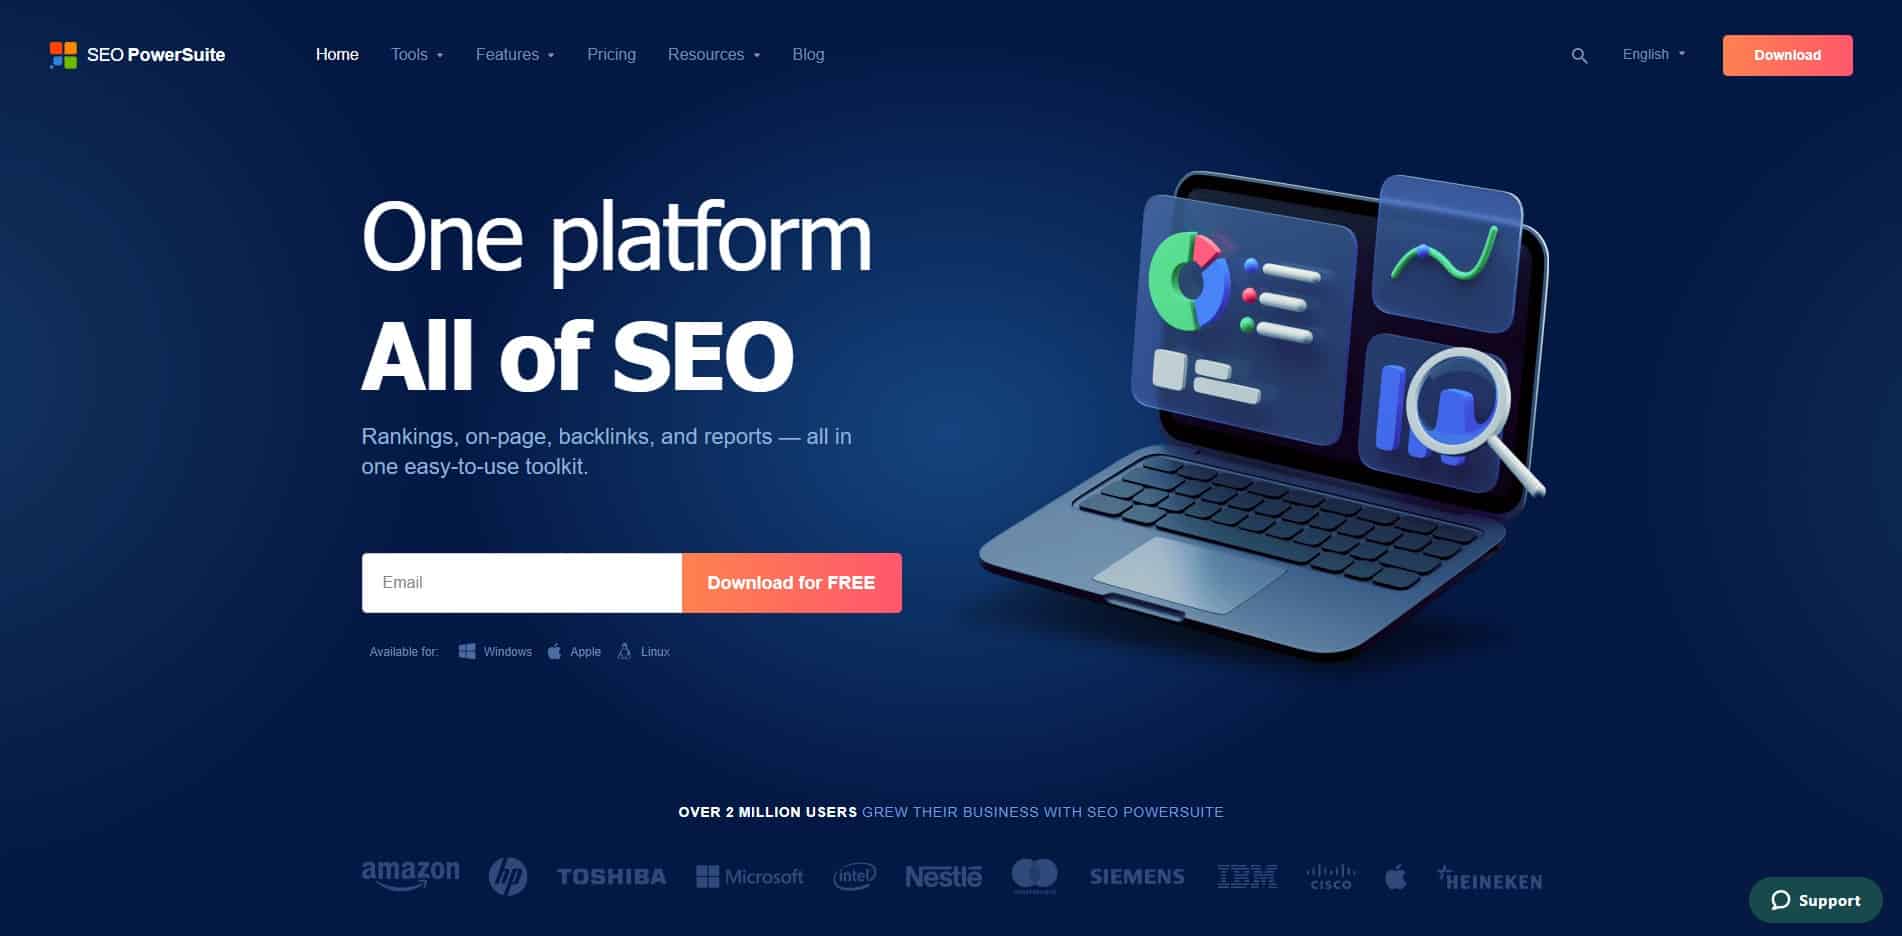 SEO PowerSuite is one of the best free alternatives to Screaming Frog and competitor